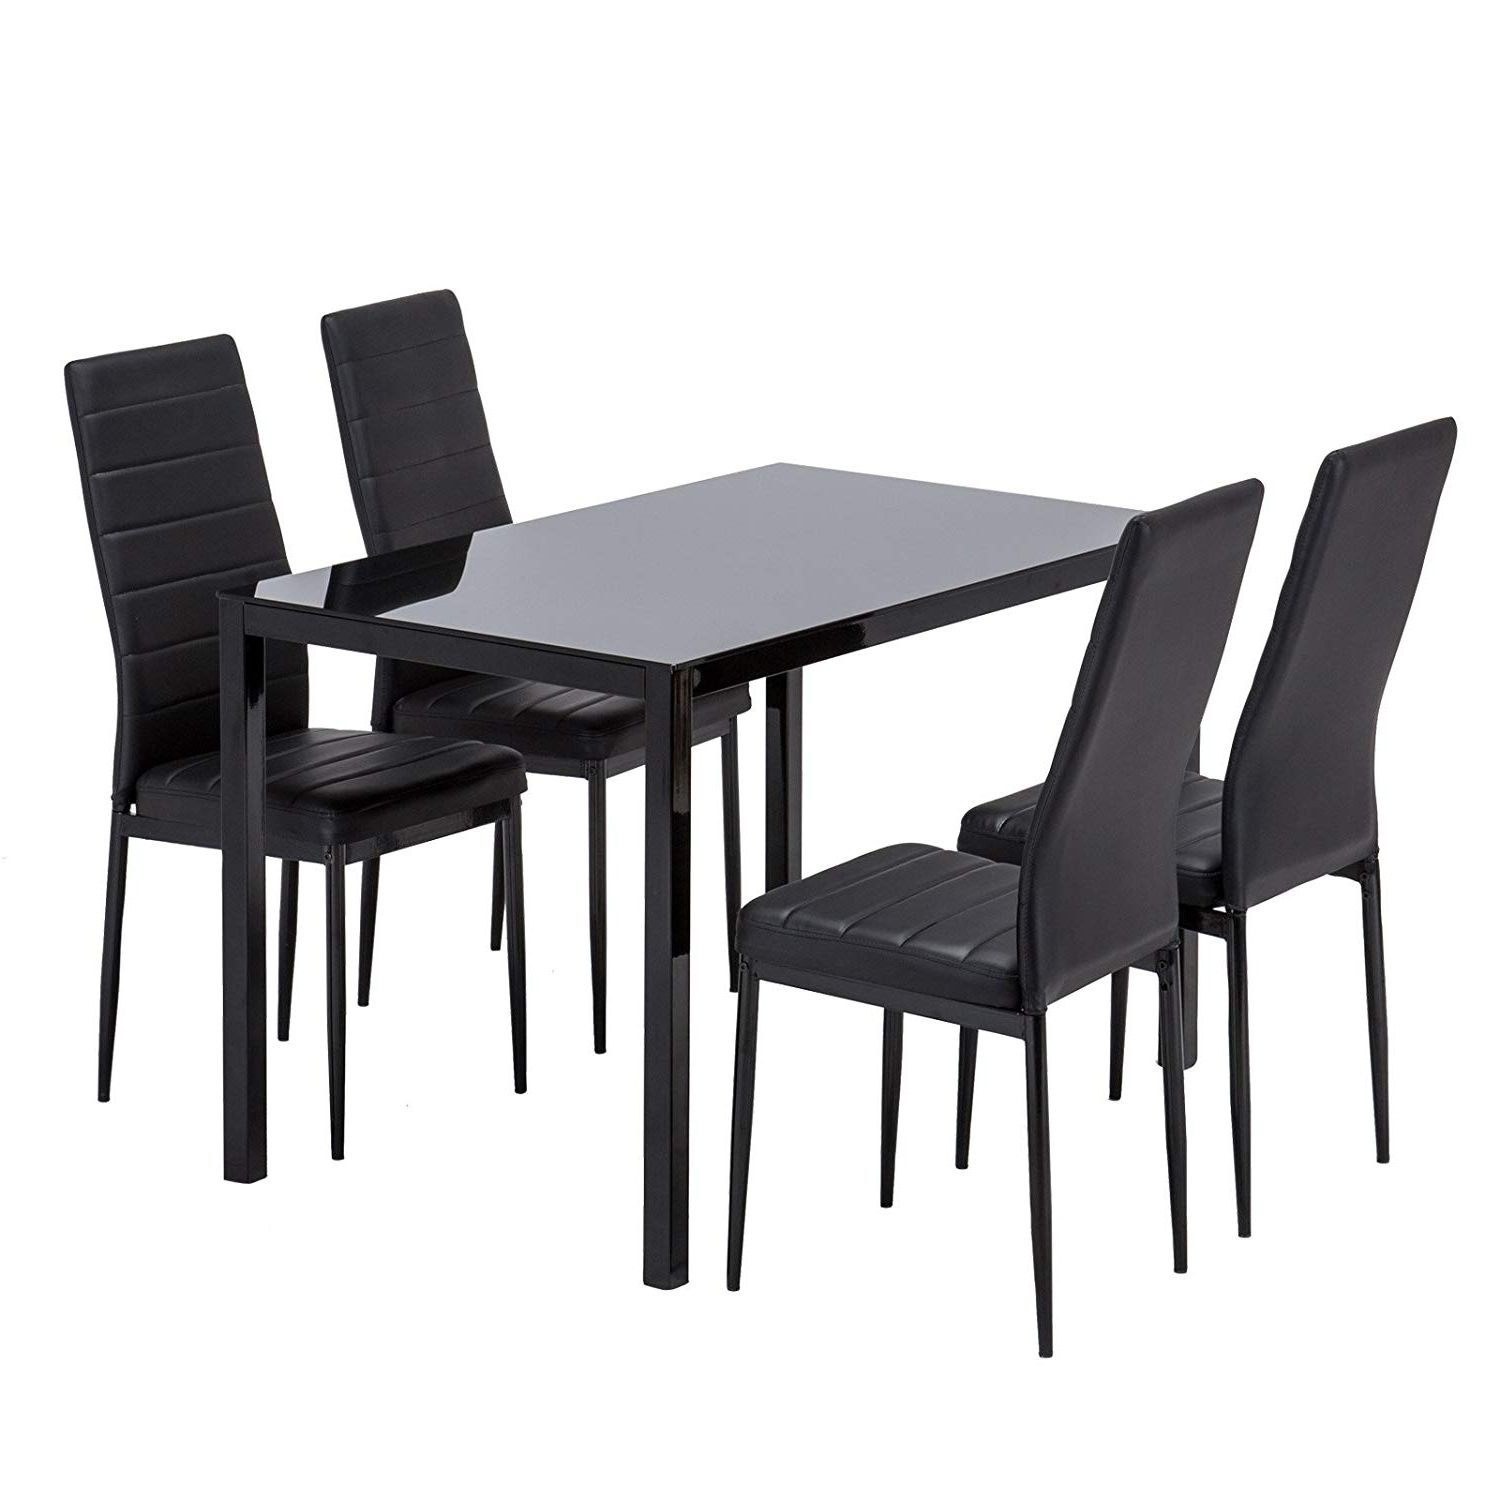 Amazon – Mecor Glass Dining Table Set, 5 Piece Kitchen Table Set Throughout Most Popular Market 6 Piece Dining Sets With Side Chairs (View 17 of 25)